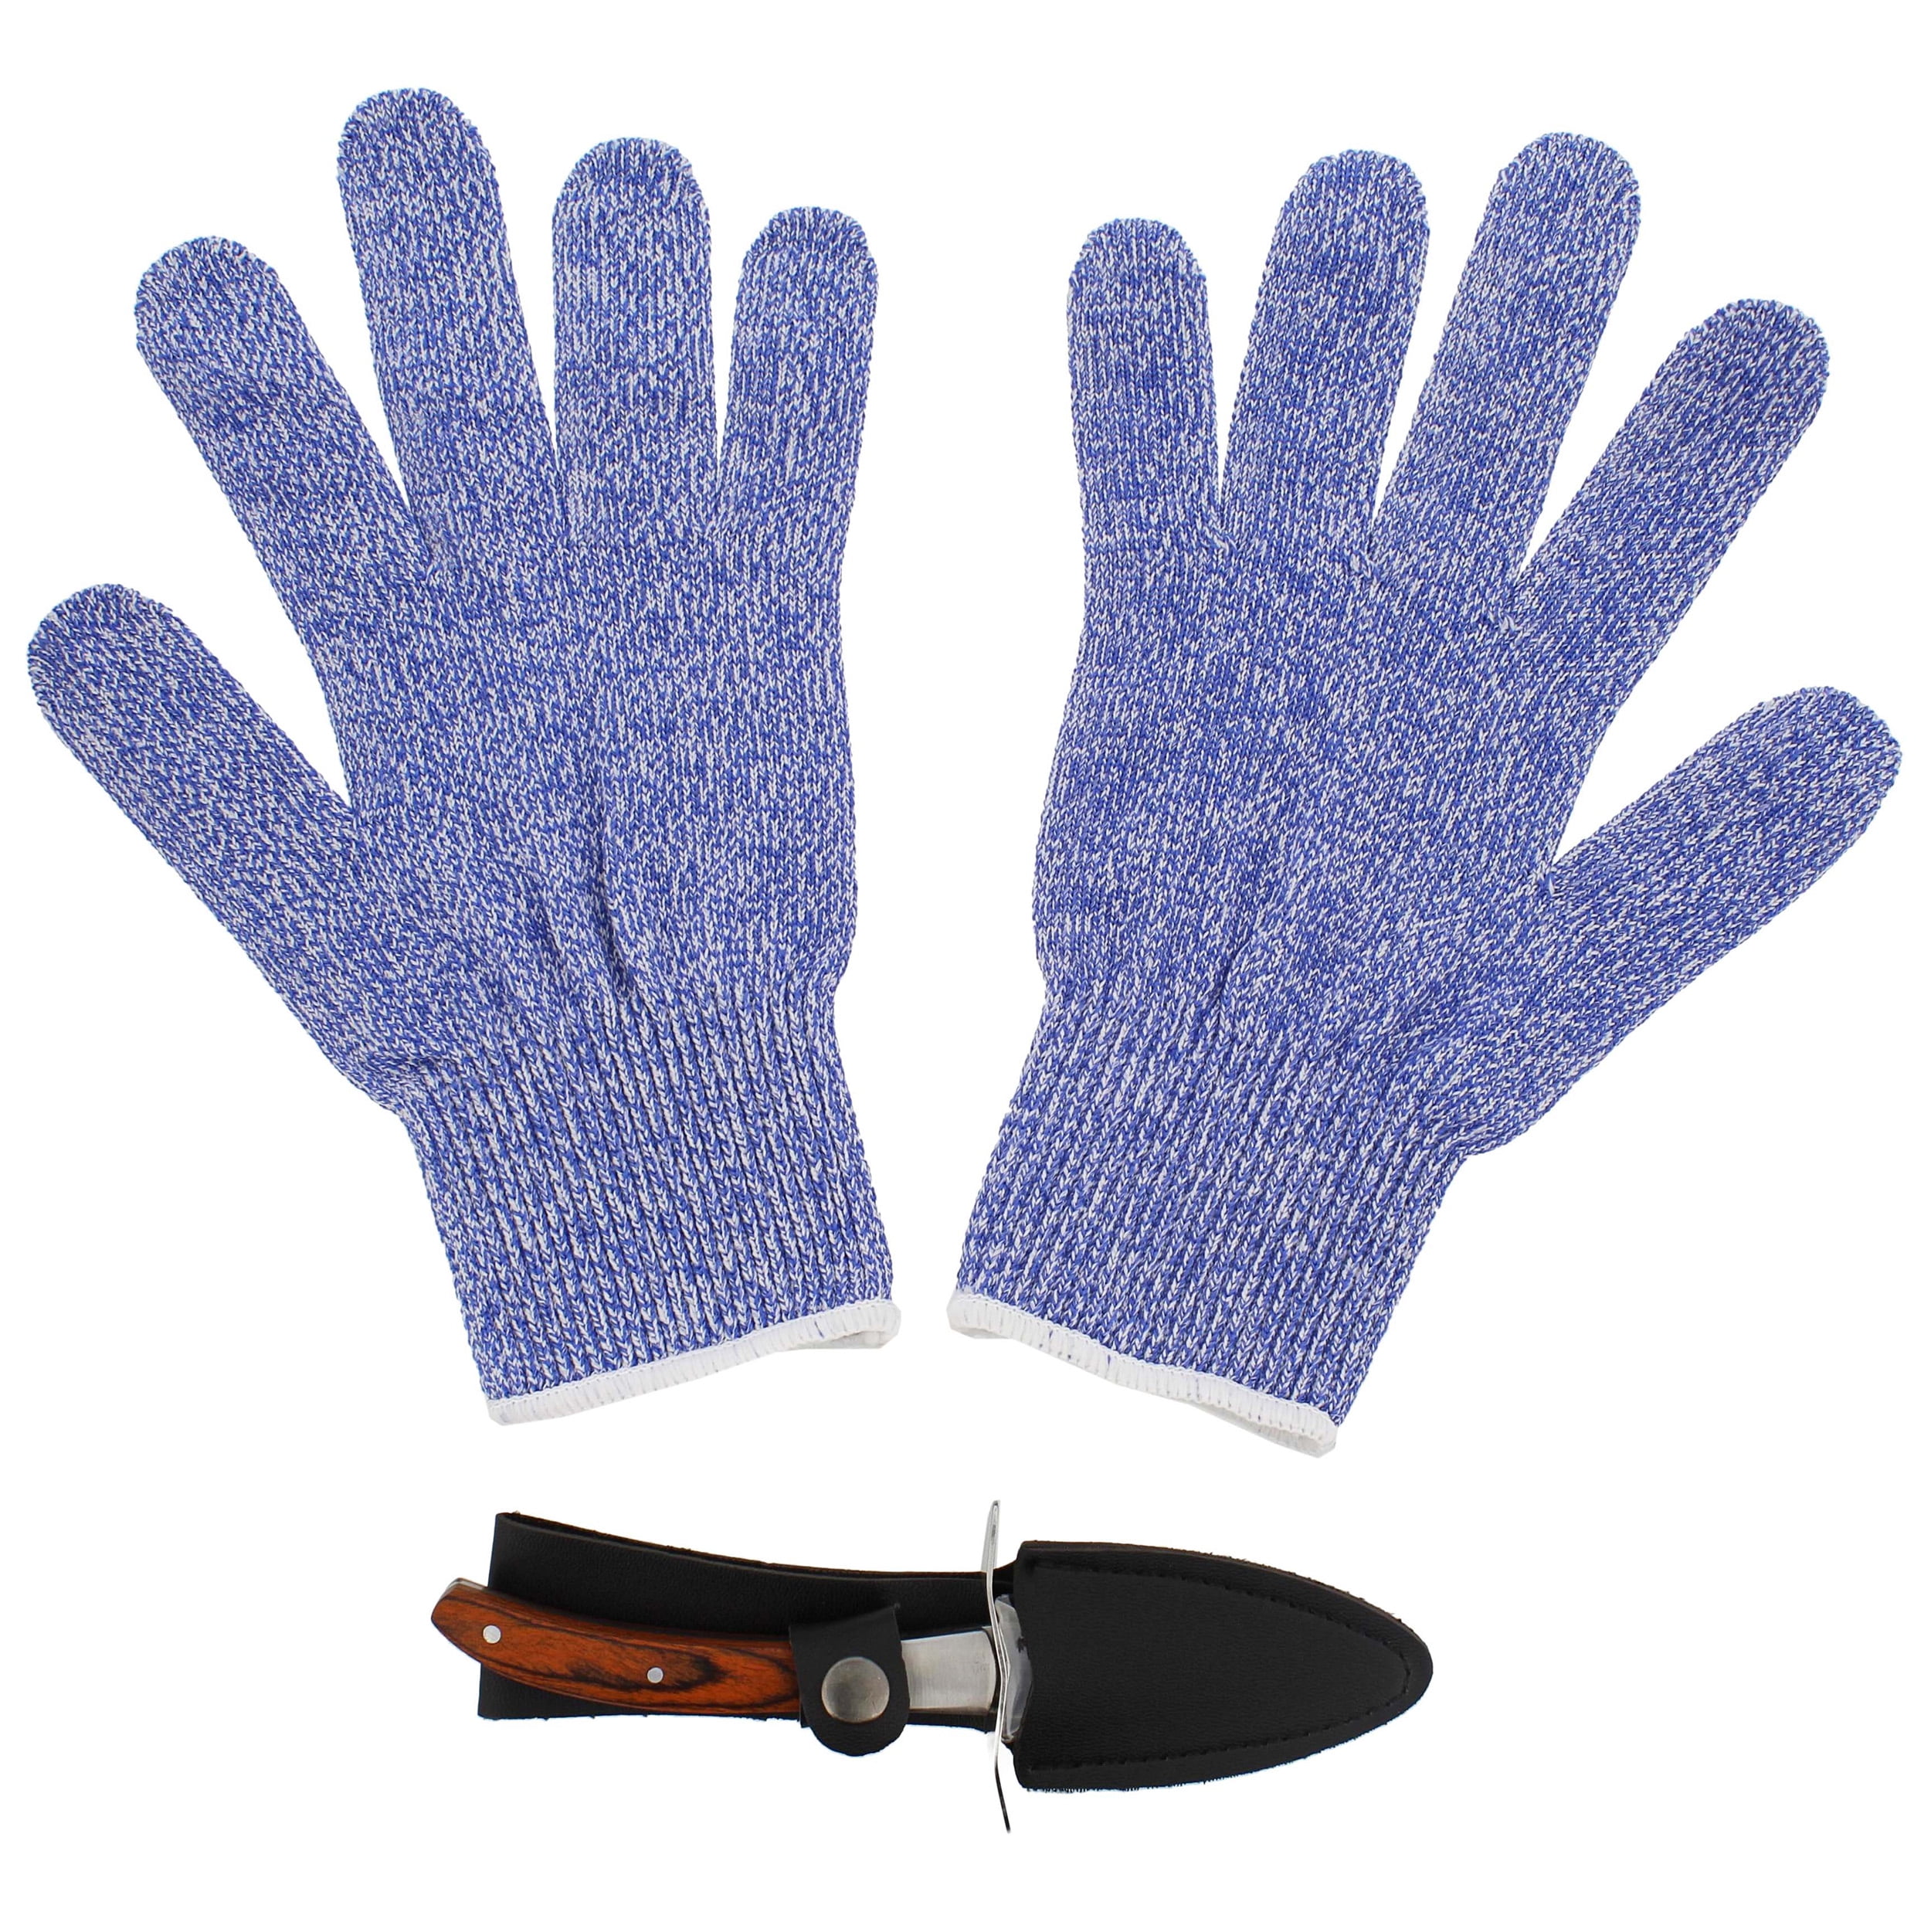 Rockland Guard Oyster Shucking Set- High Performance Level 5